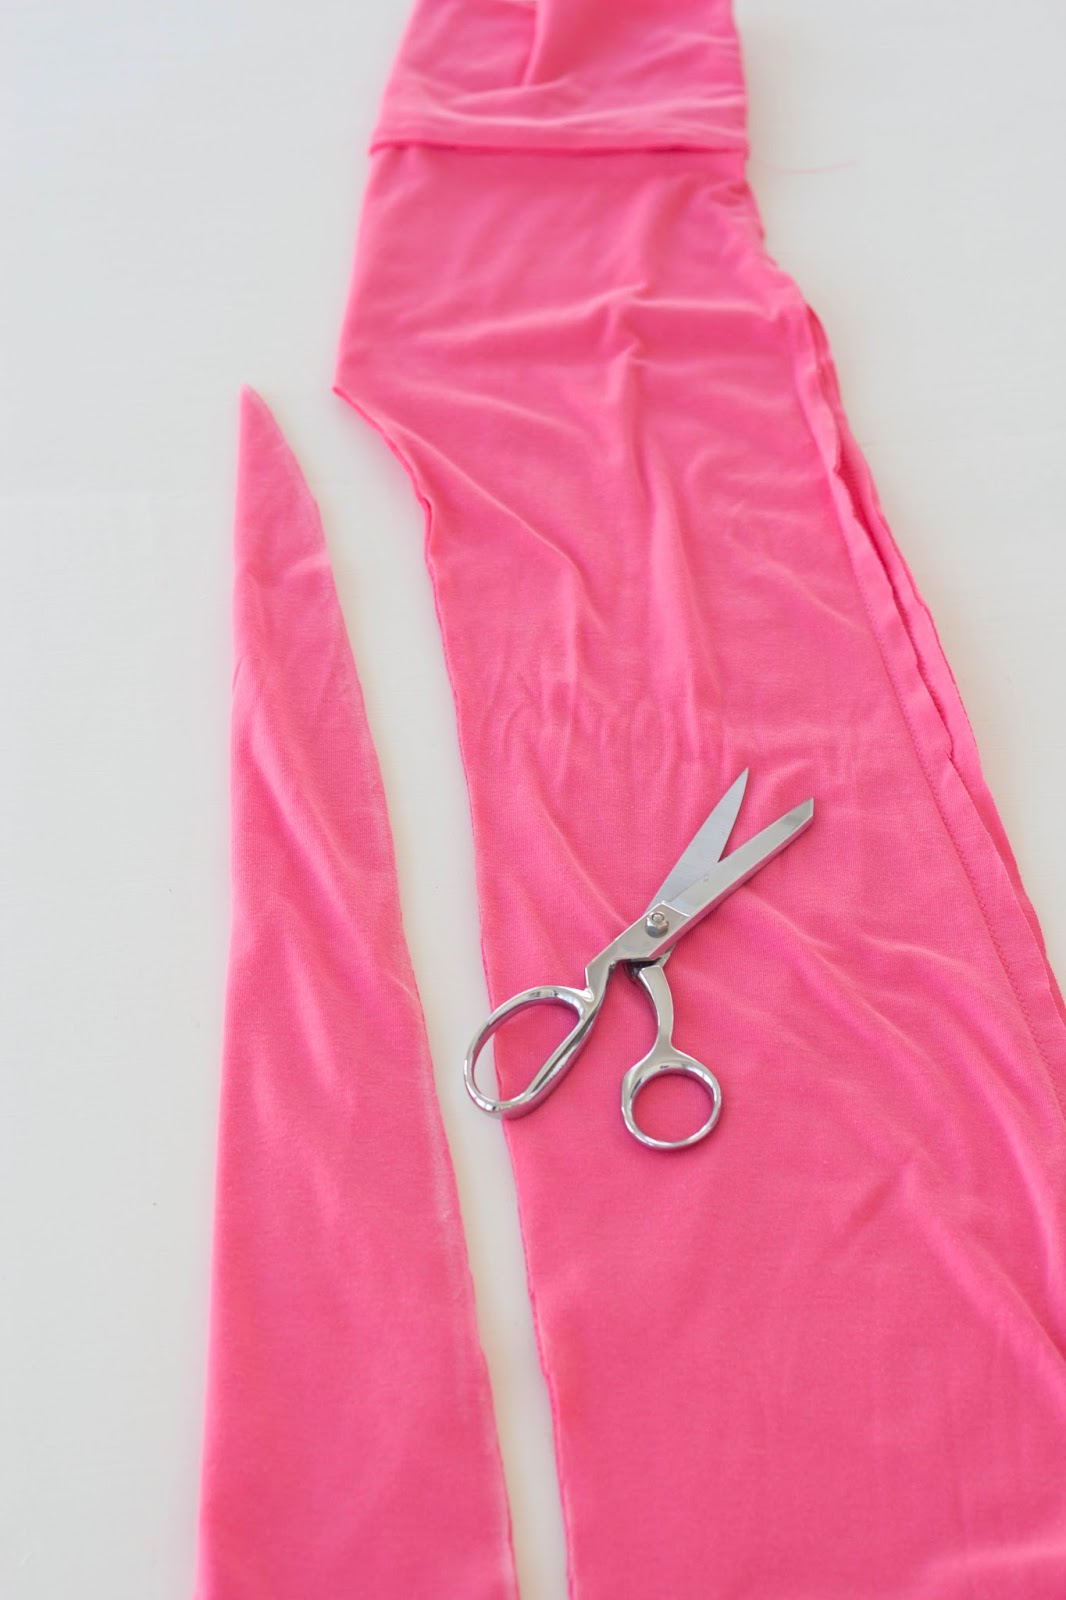 Turning Pants/Trousers into a Pencil Skirt | InspiredAdornations